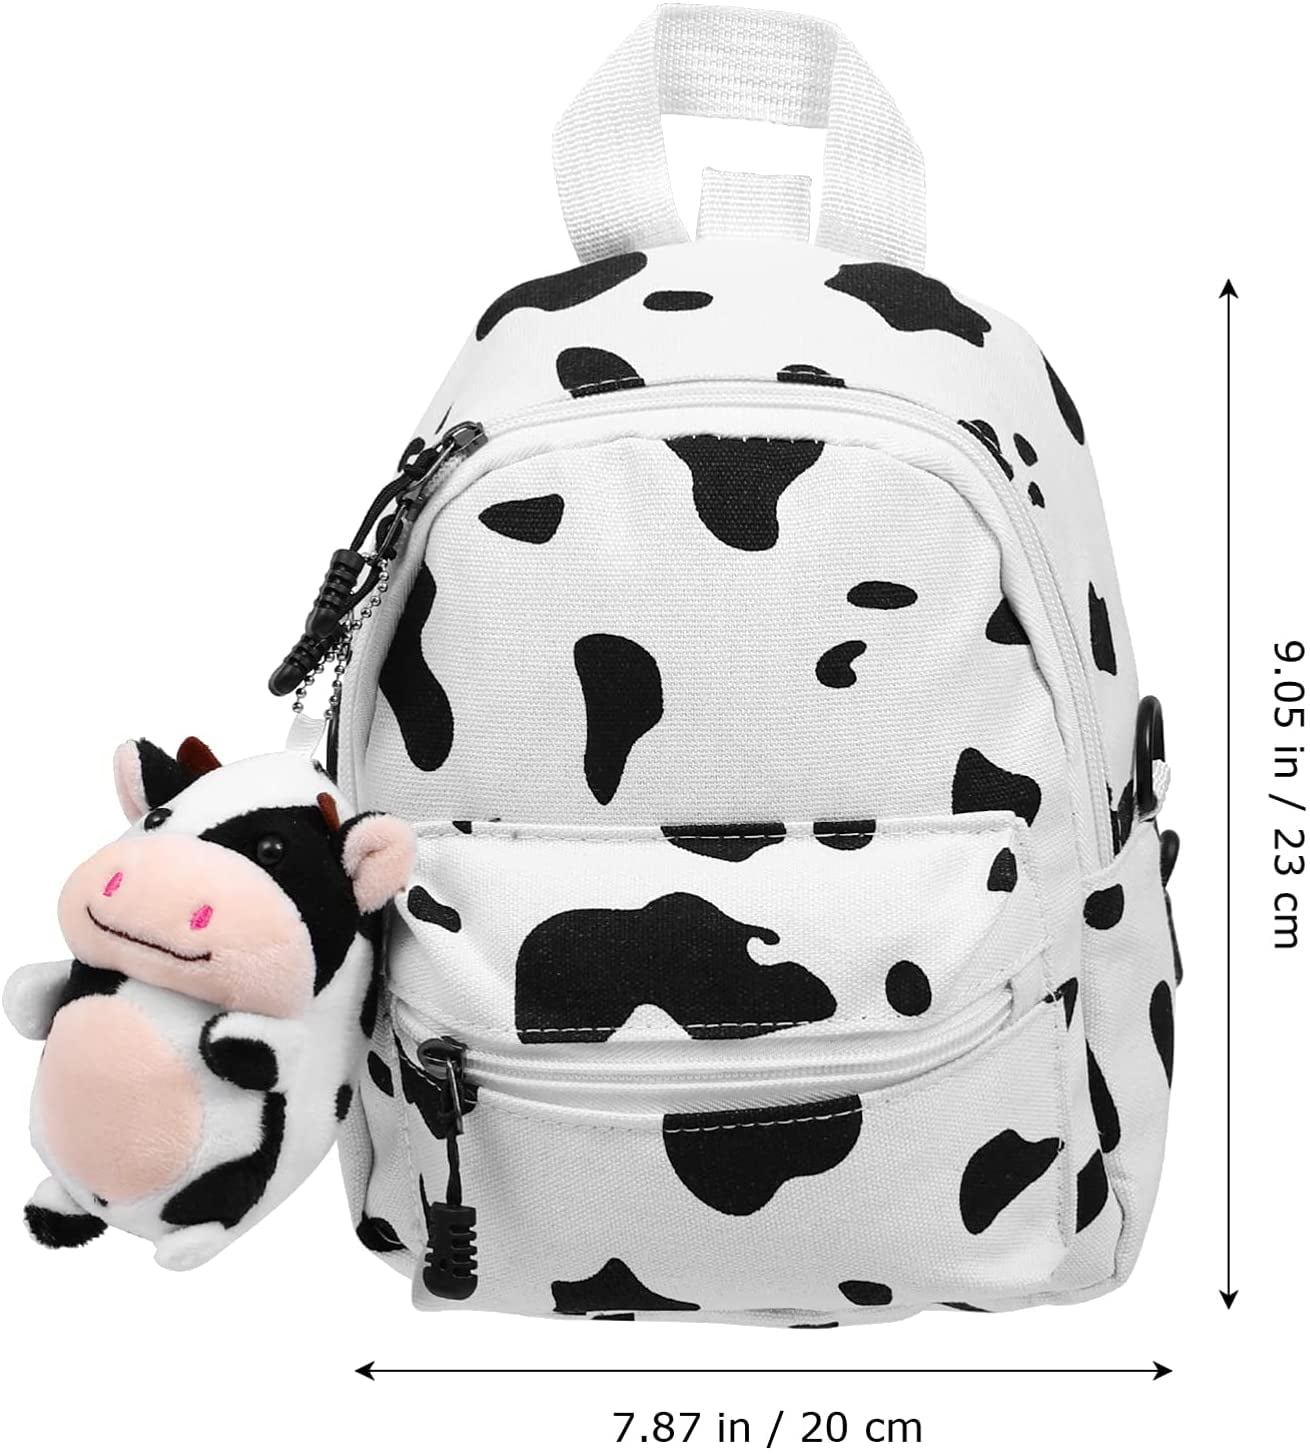 Backpack, rucksack, cow print backpack, cow print backpack with plush ...